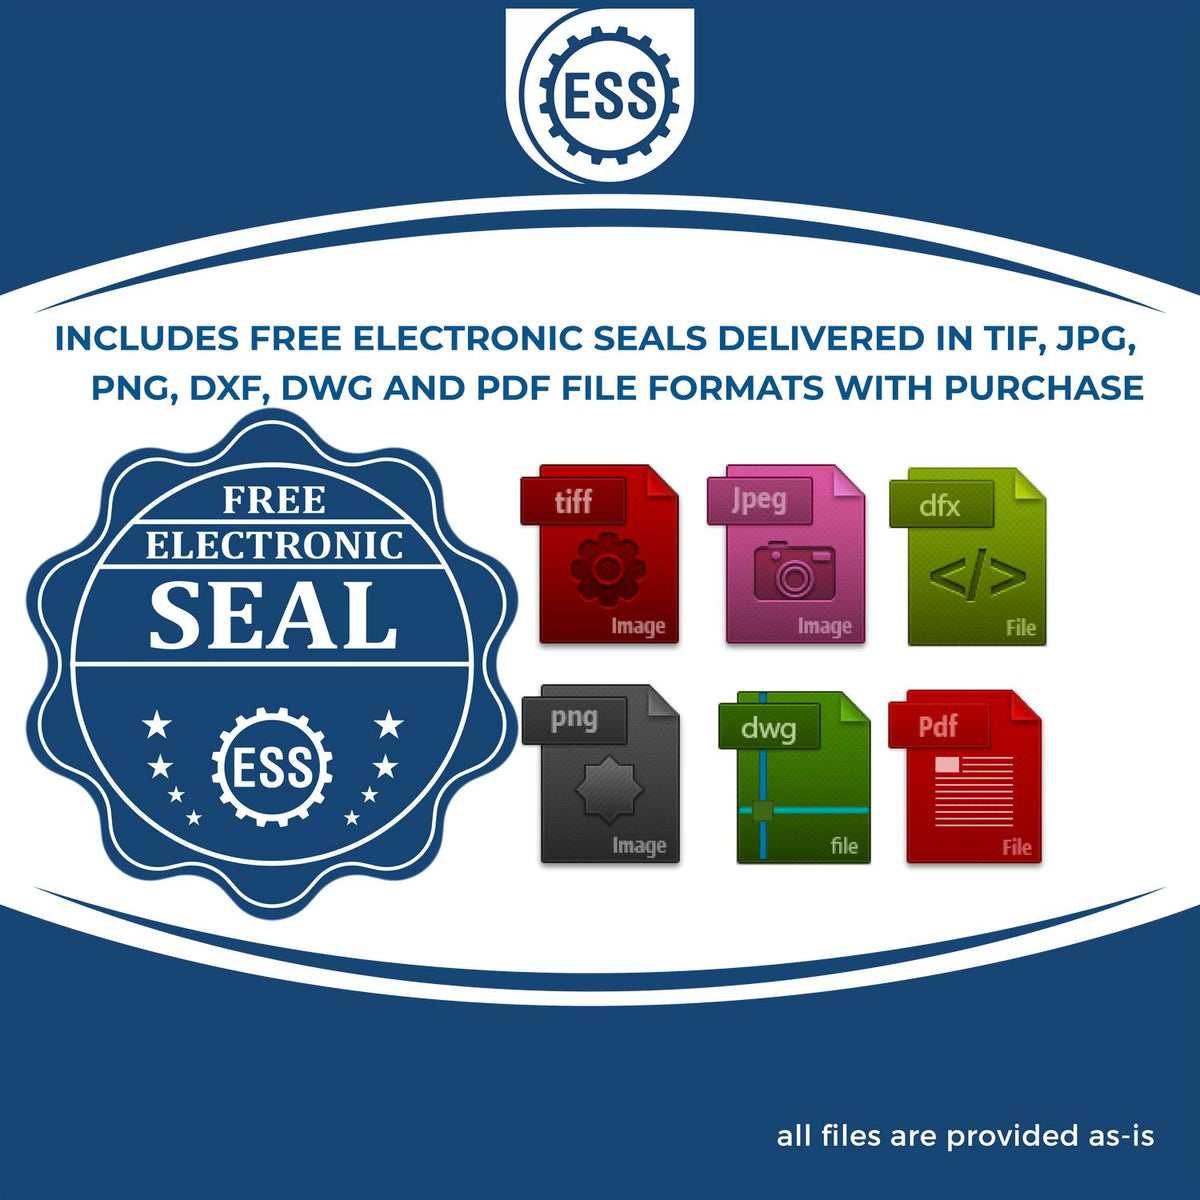 An infographic for the free electronic seal for the Premium MaxLight Pre-Inked Vermont Landscape Architectural Stamp illustrating the different file type icons such as DXF, DWG, TIF, JPG and PNG.